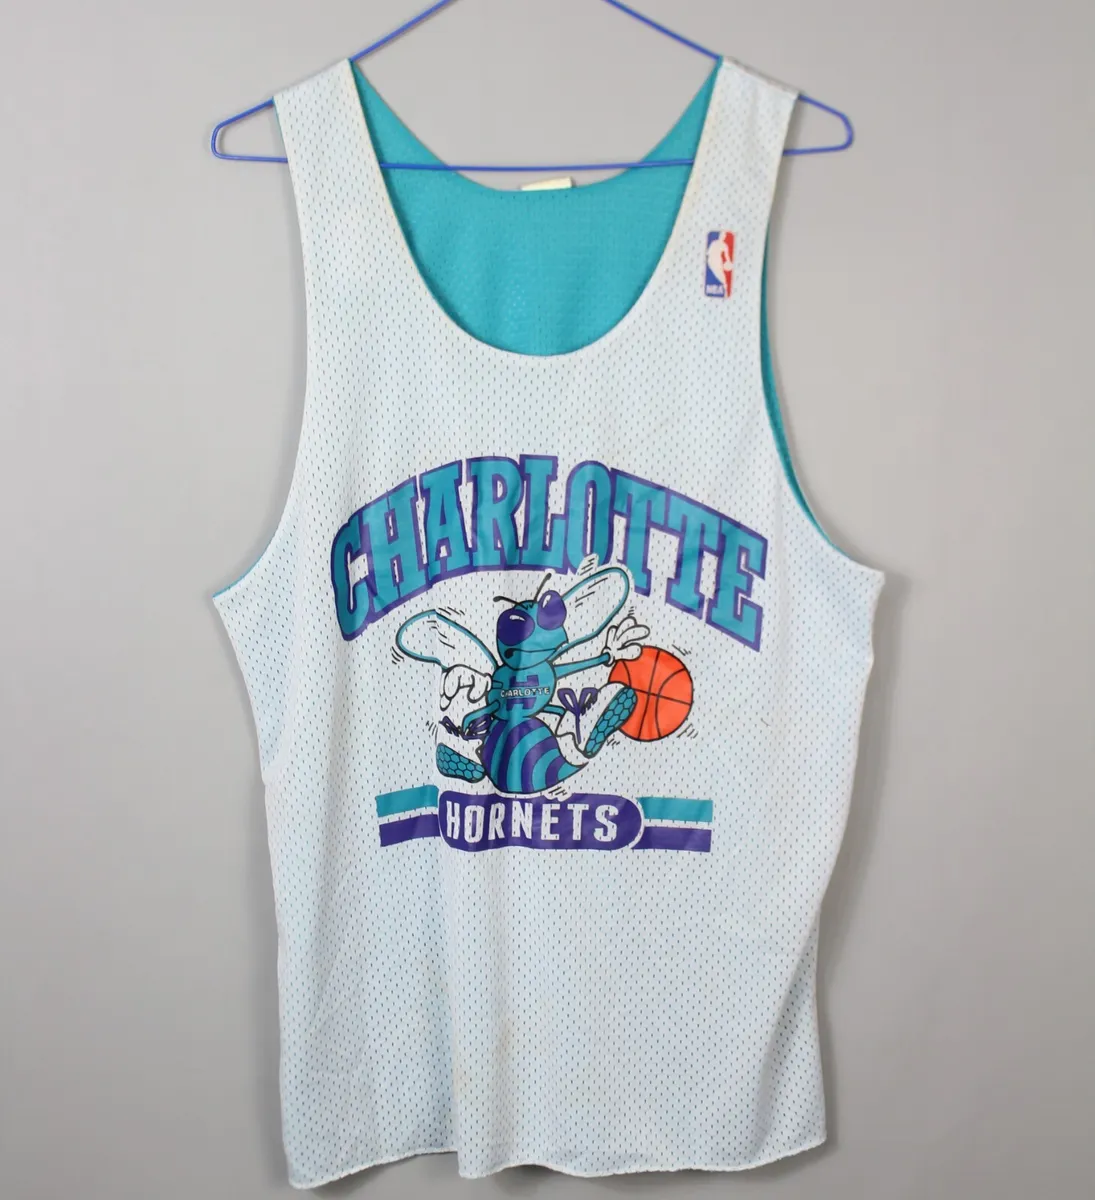 hornets mitchell and ness jersey